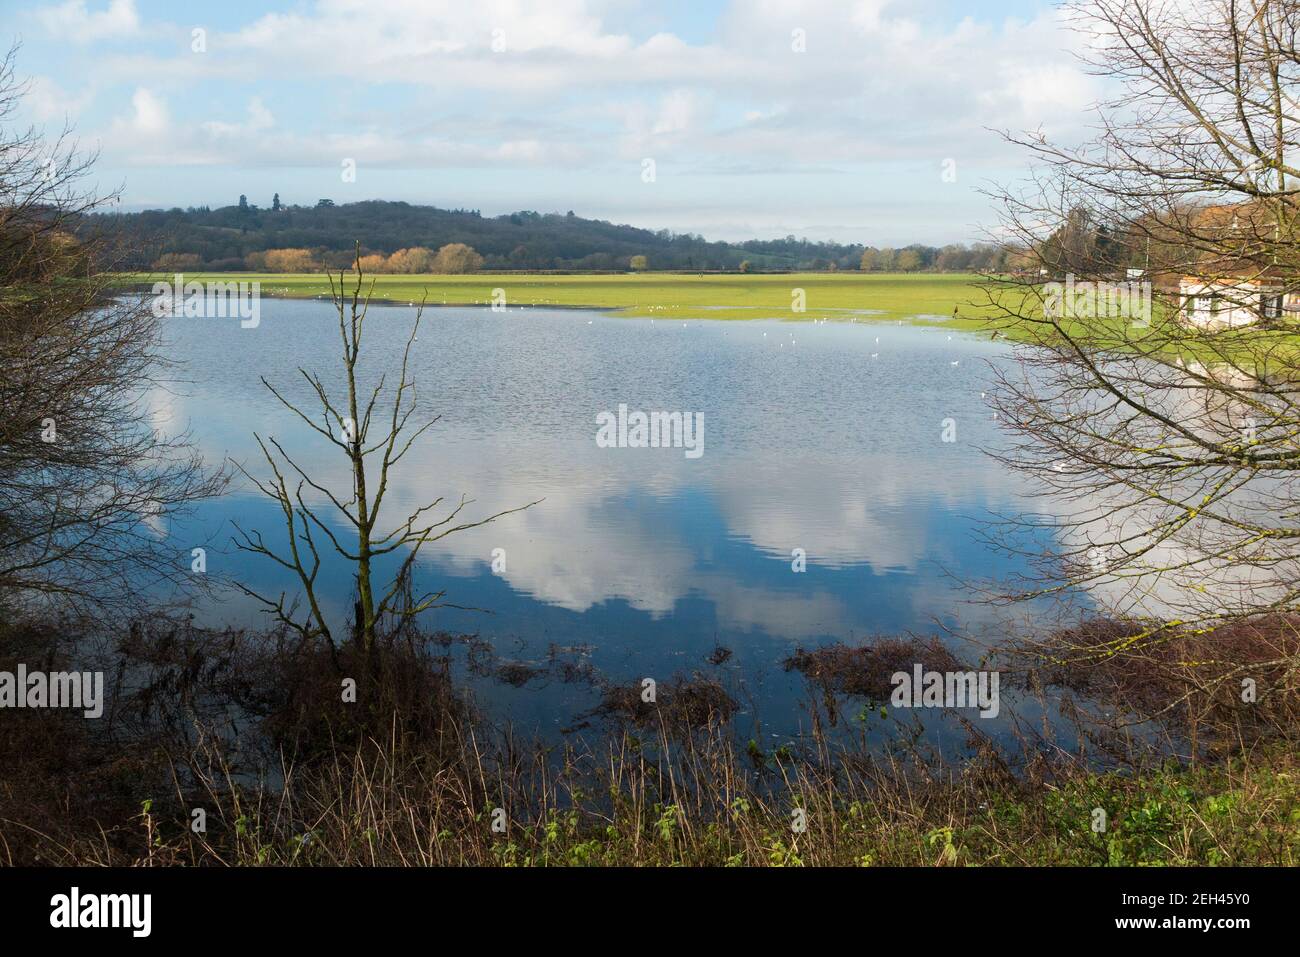 Runnymede meadows & flood plain, site of the signing of Magna Carta in year 1215 by King John & the English Barons. Surrey. UK. Winter day with sunny sun and blue sky skies. UK (123) Stock Photo